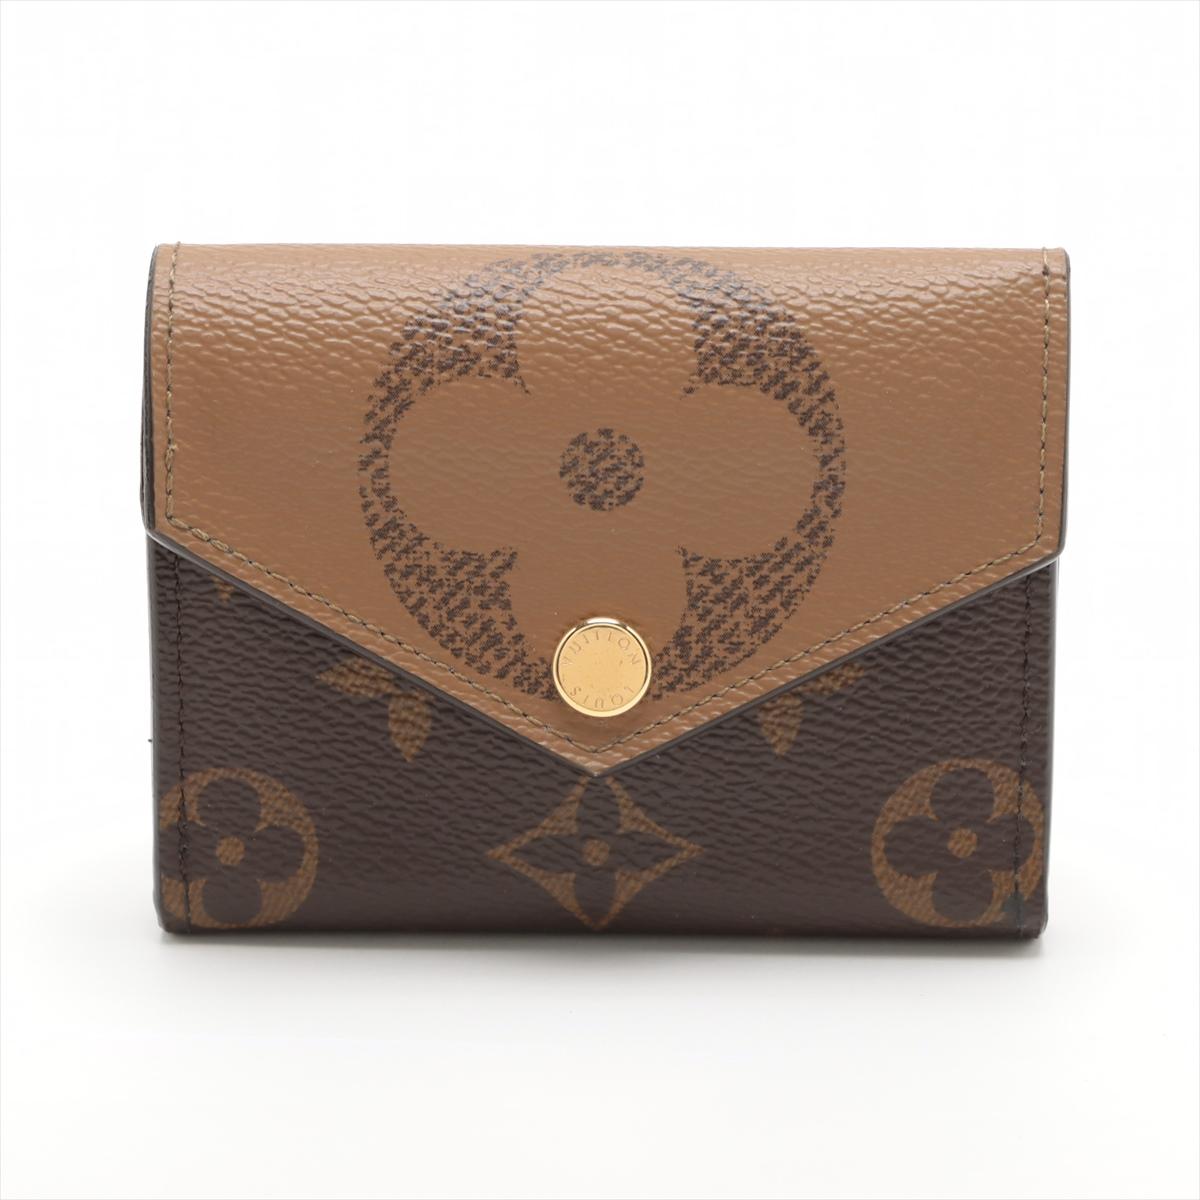 The Louis Vuitton Giant Monogram Reverse Zoé Wallet a striking and contemporary accessory that showcases the iconic Monogram pattern in a bold and vibrant design. The wallet features Giant Monogram Reverse canvas, a playful and oversized